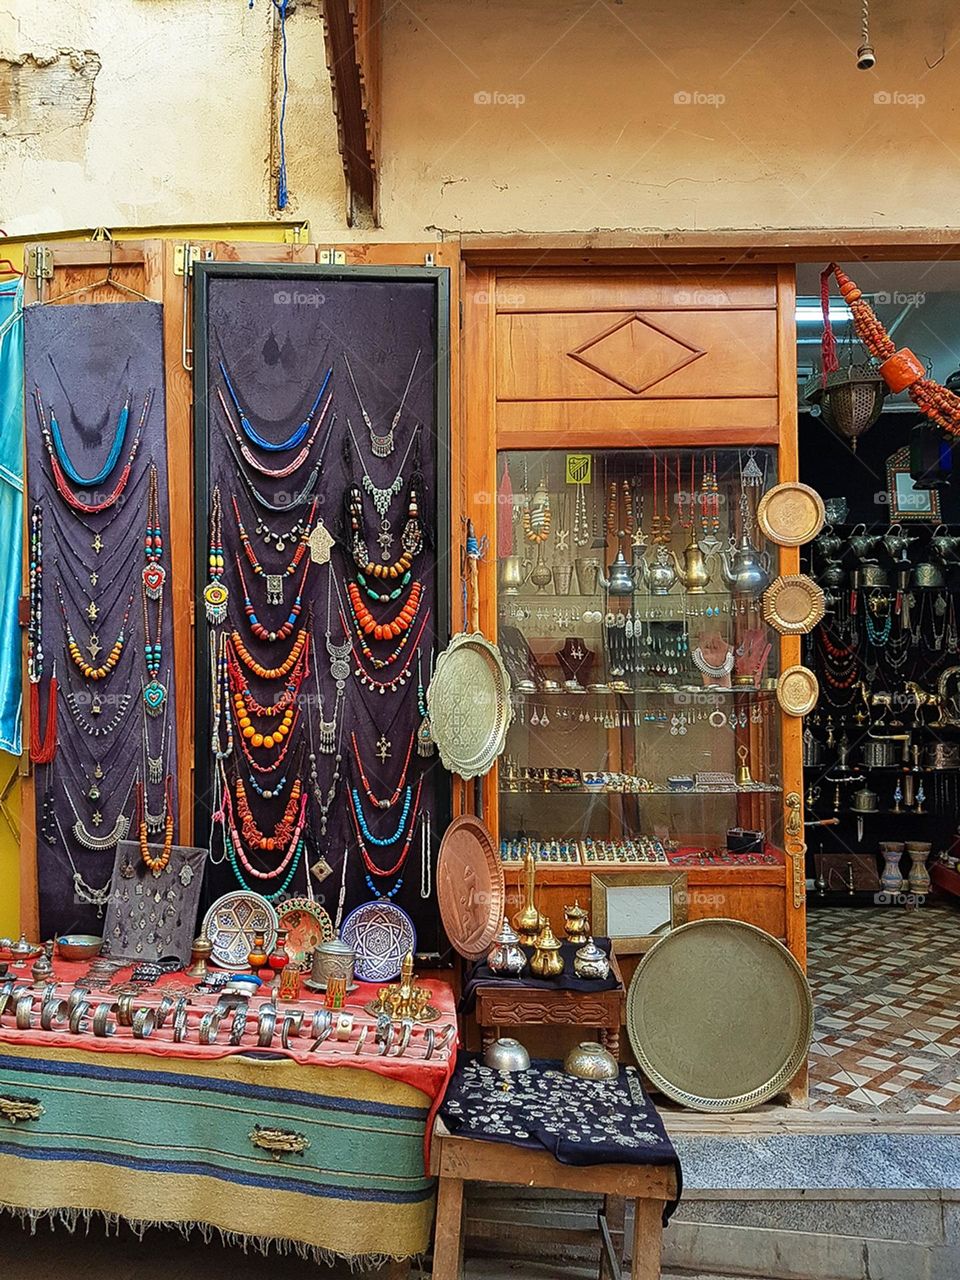 crafts hand made jewelery for sell in an old medina of fez morocco